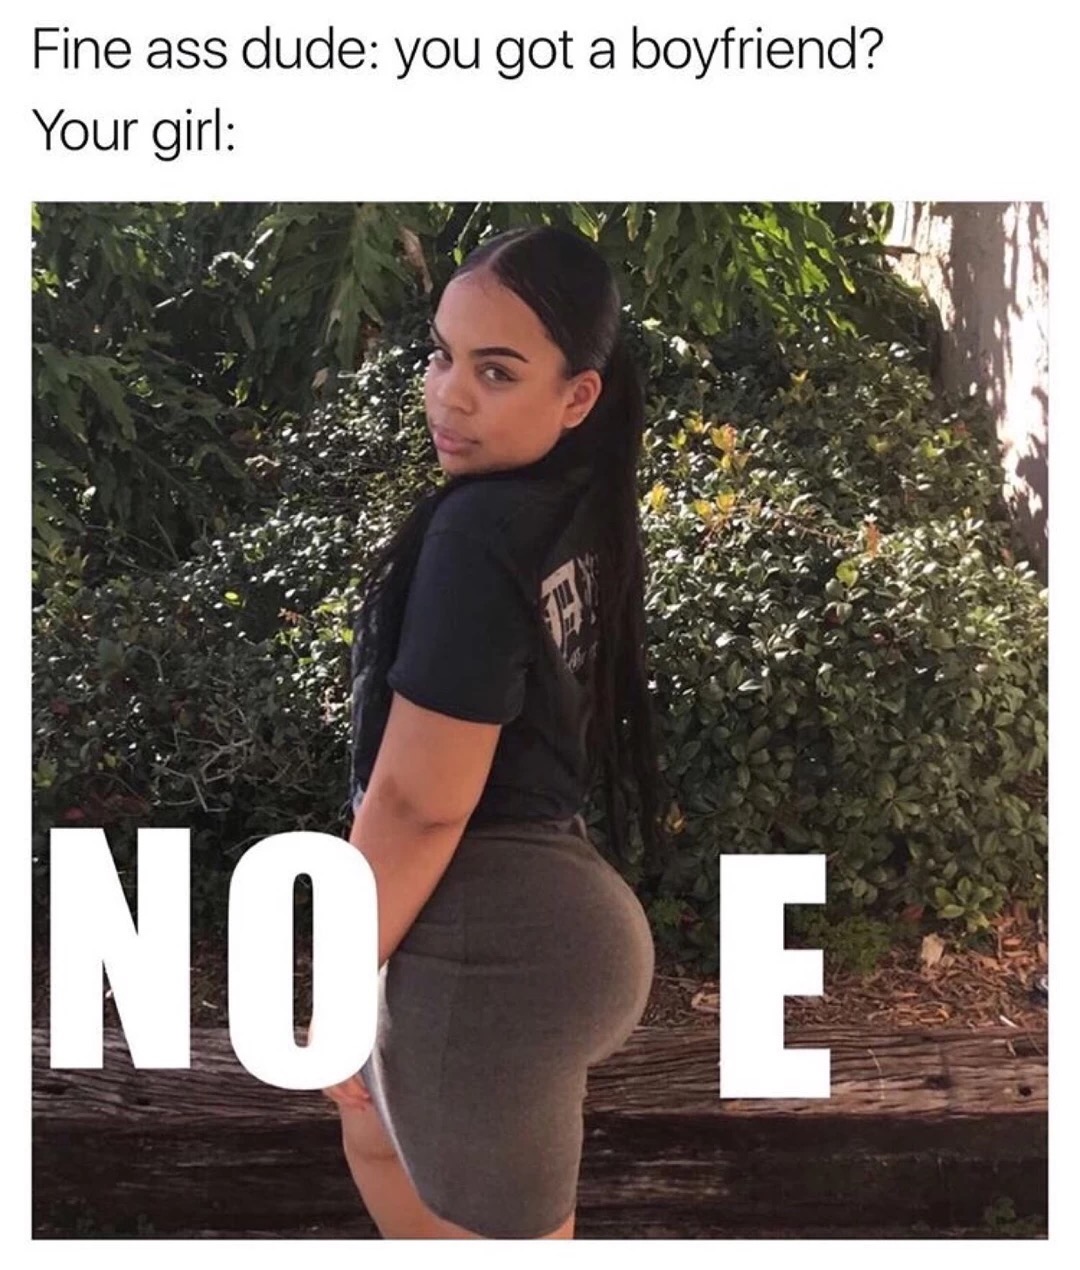 Meme of someone asking your girl if she has a Boy Friend and a big fat NOPE with the P as her butt in those pants.